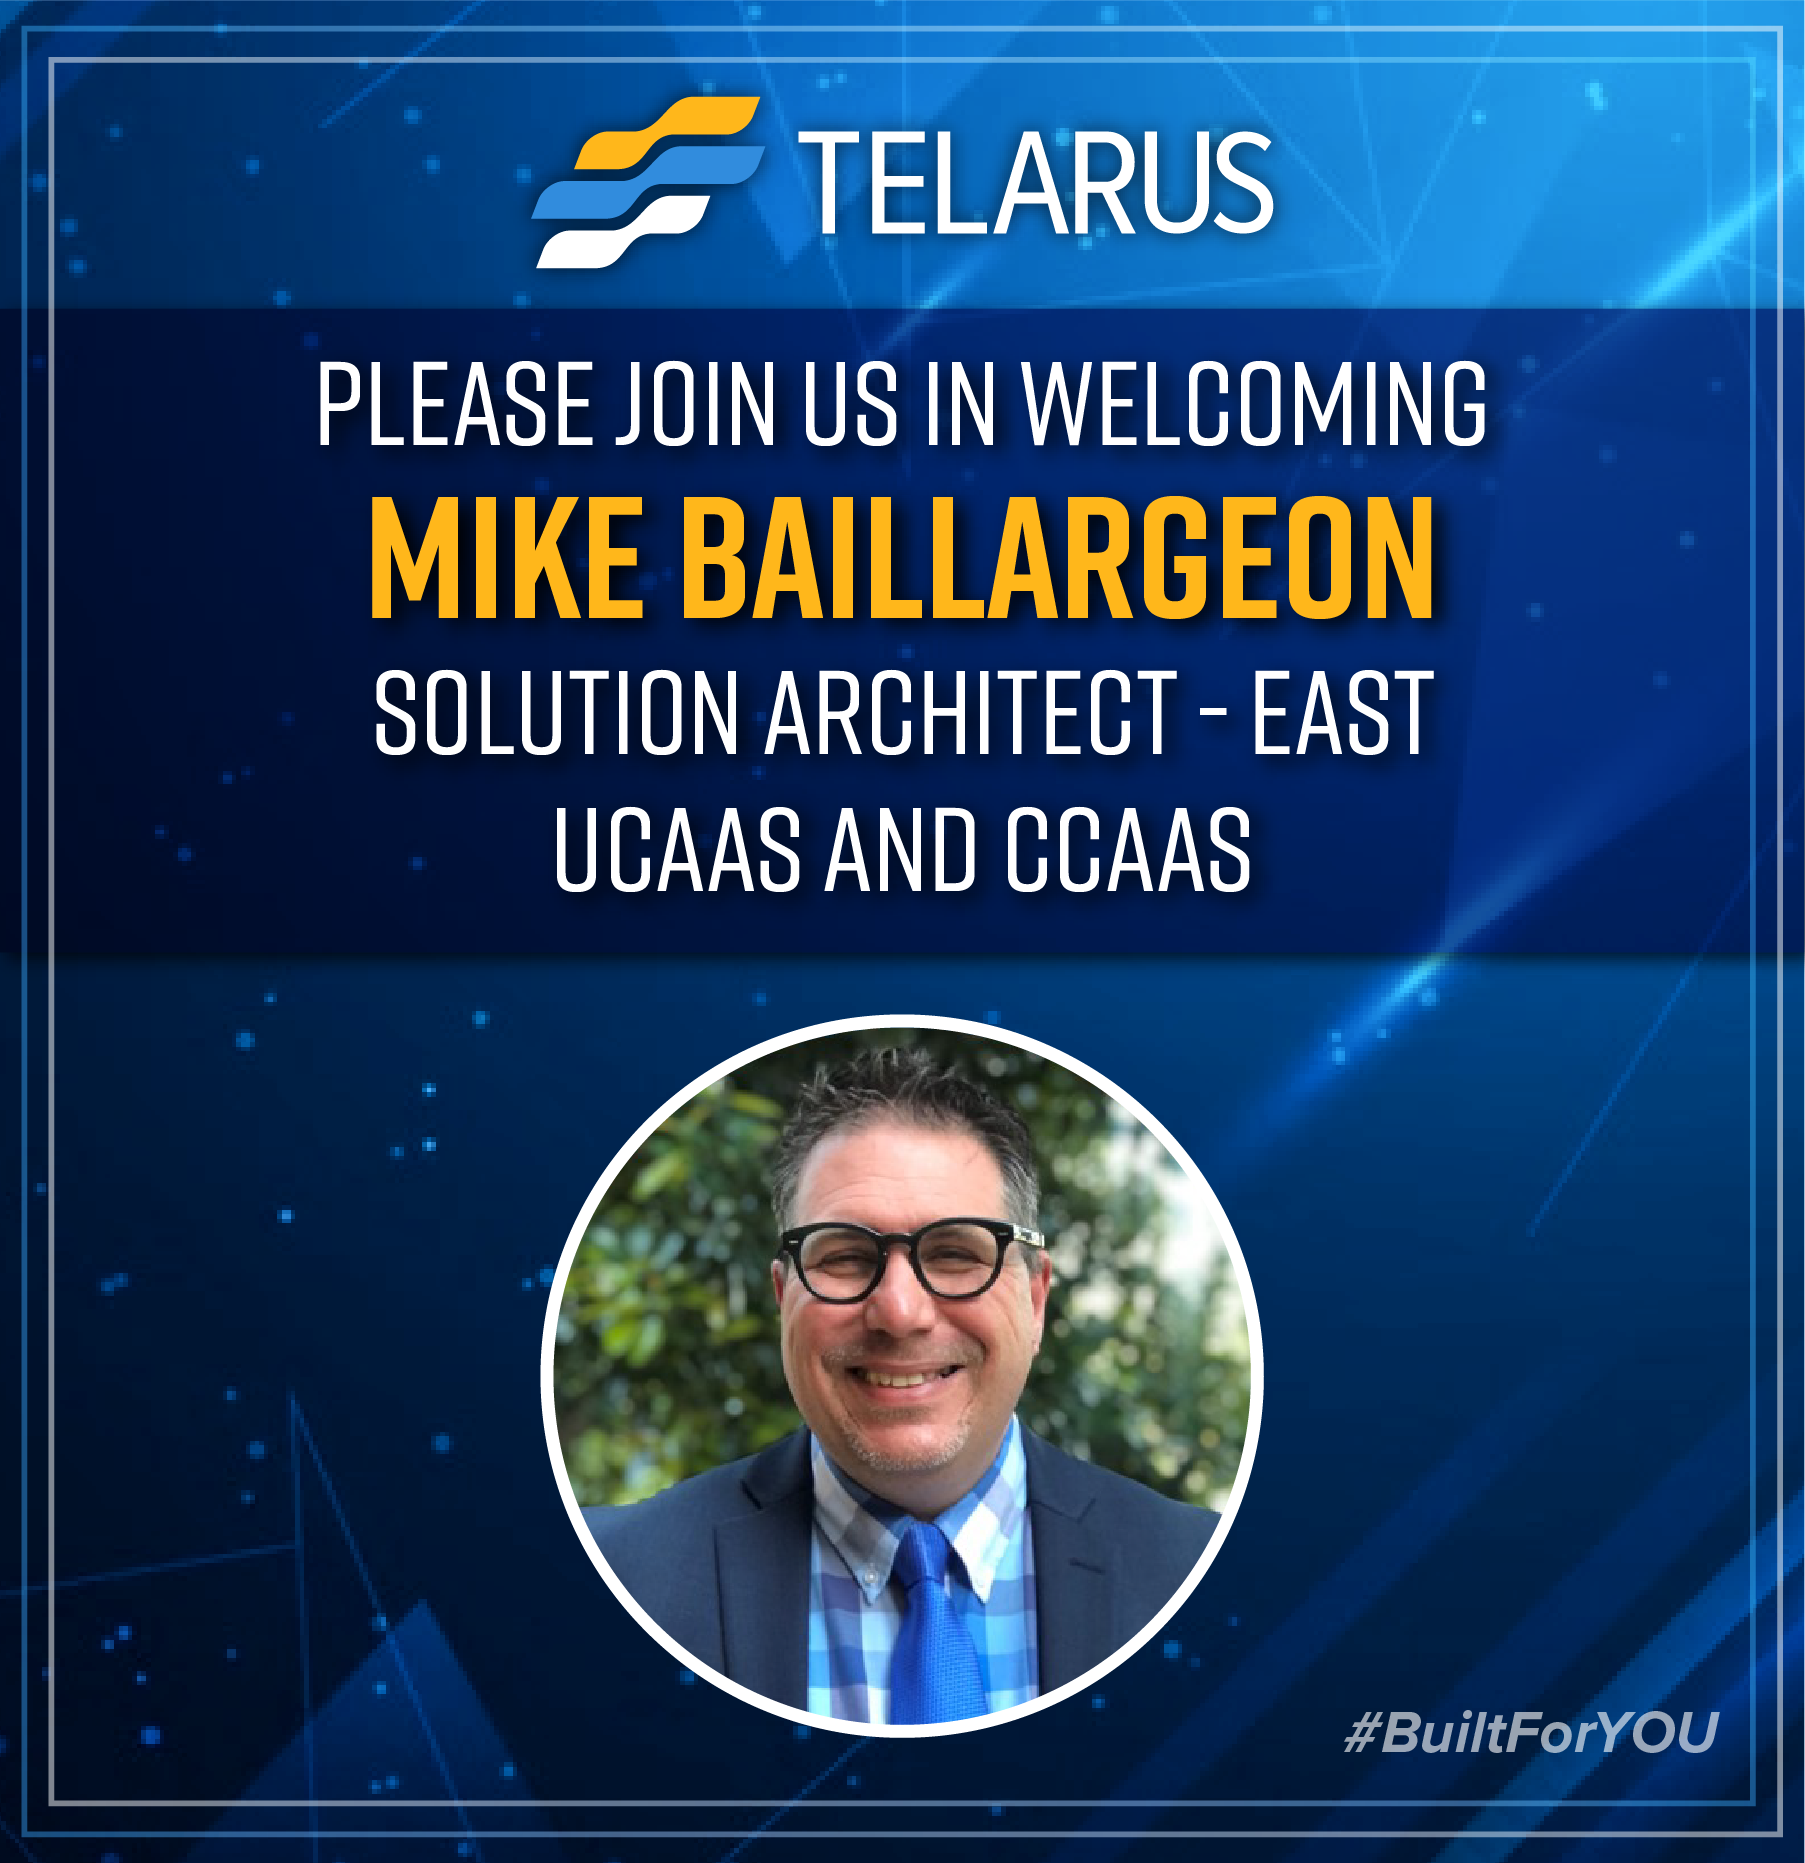 Telarus Hires Mike Baillargeon as New Solution Architect for UCaaS and CCaaS in the East